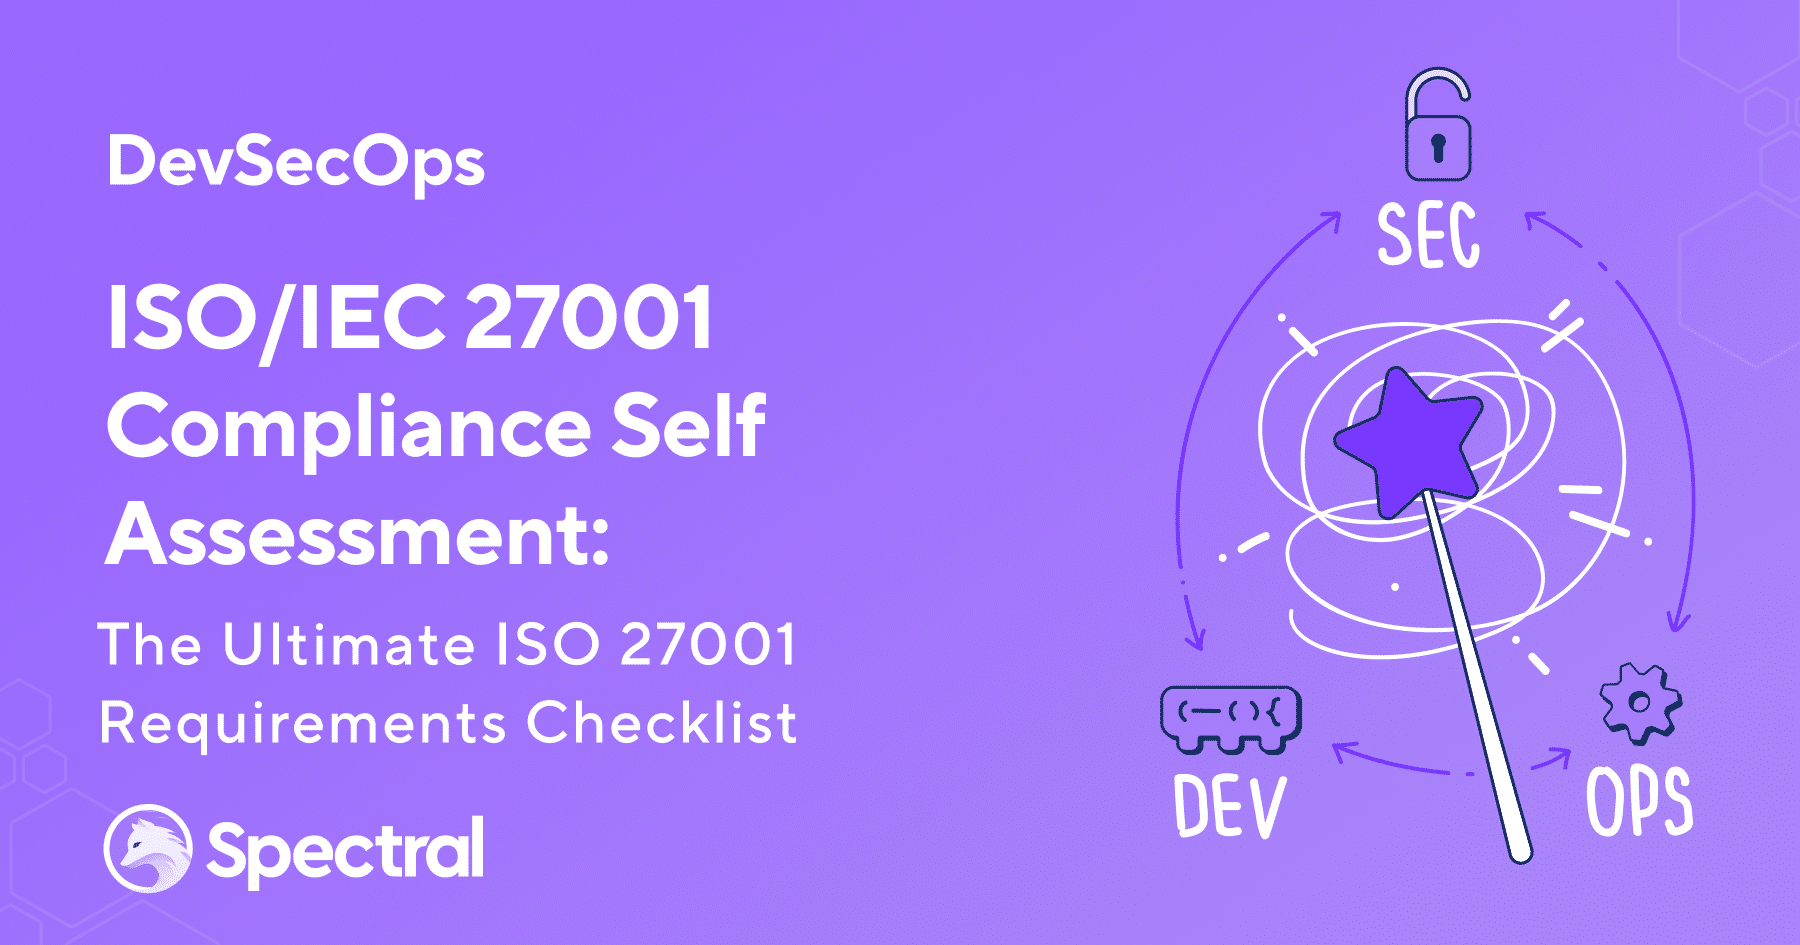 iso/iec 27001 compliance and assessment